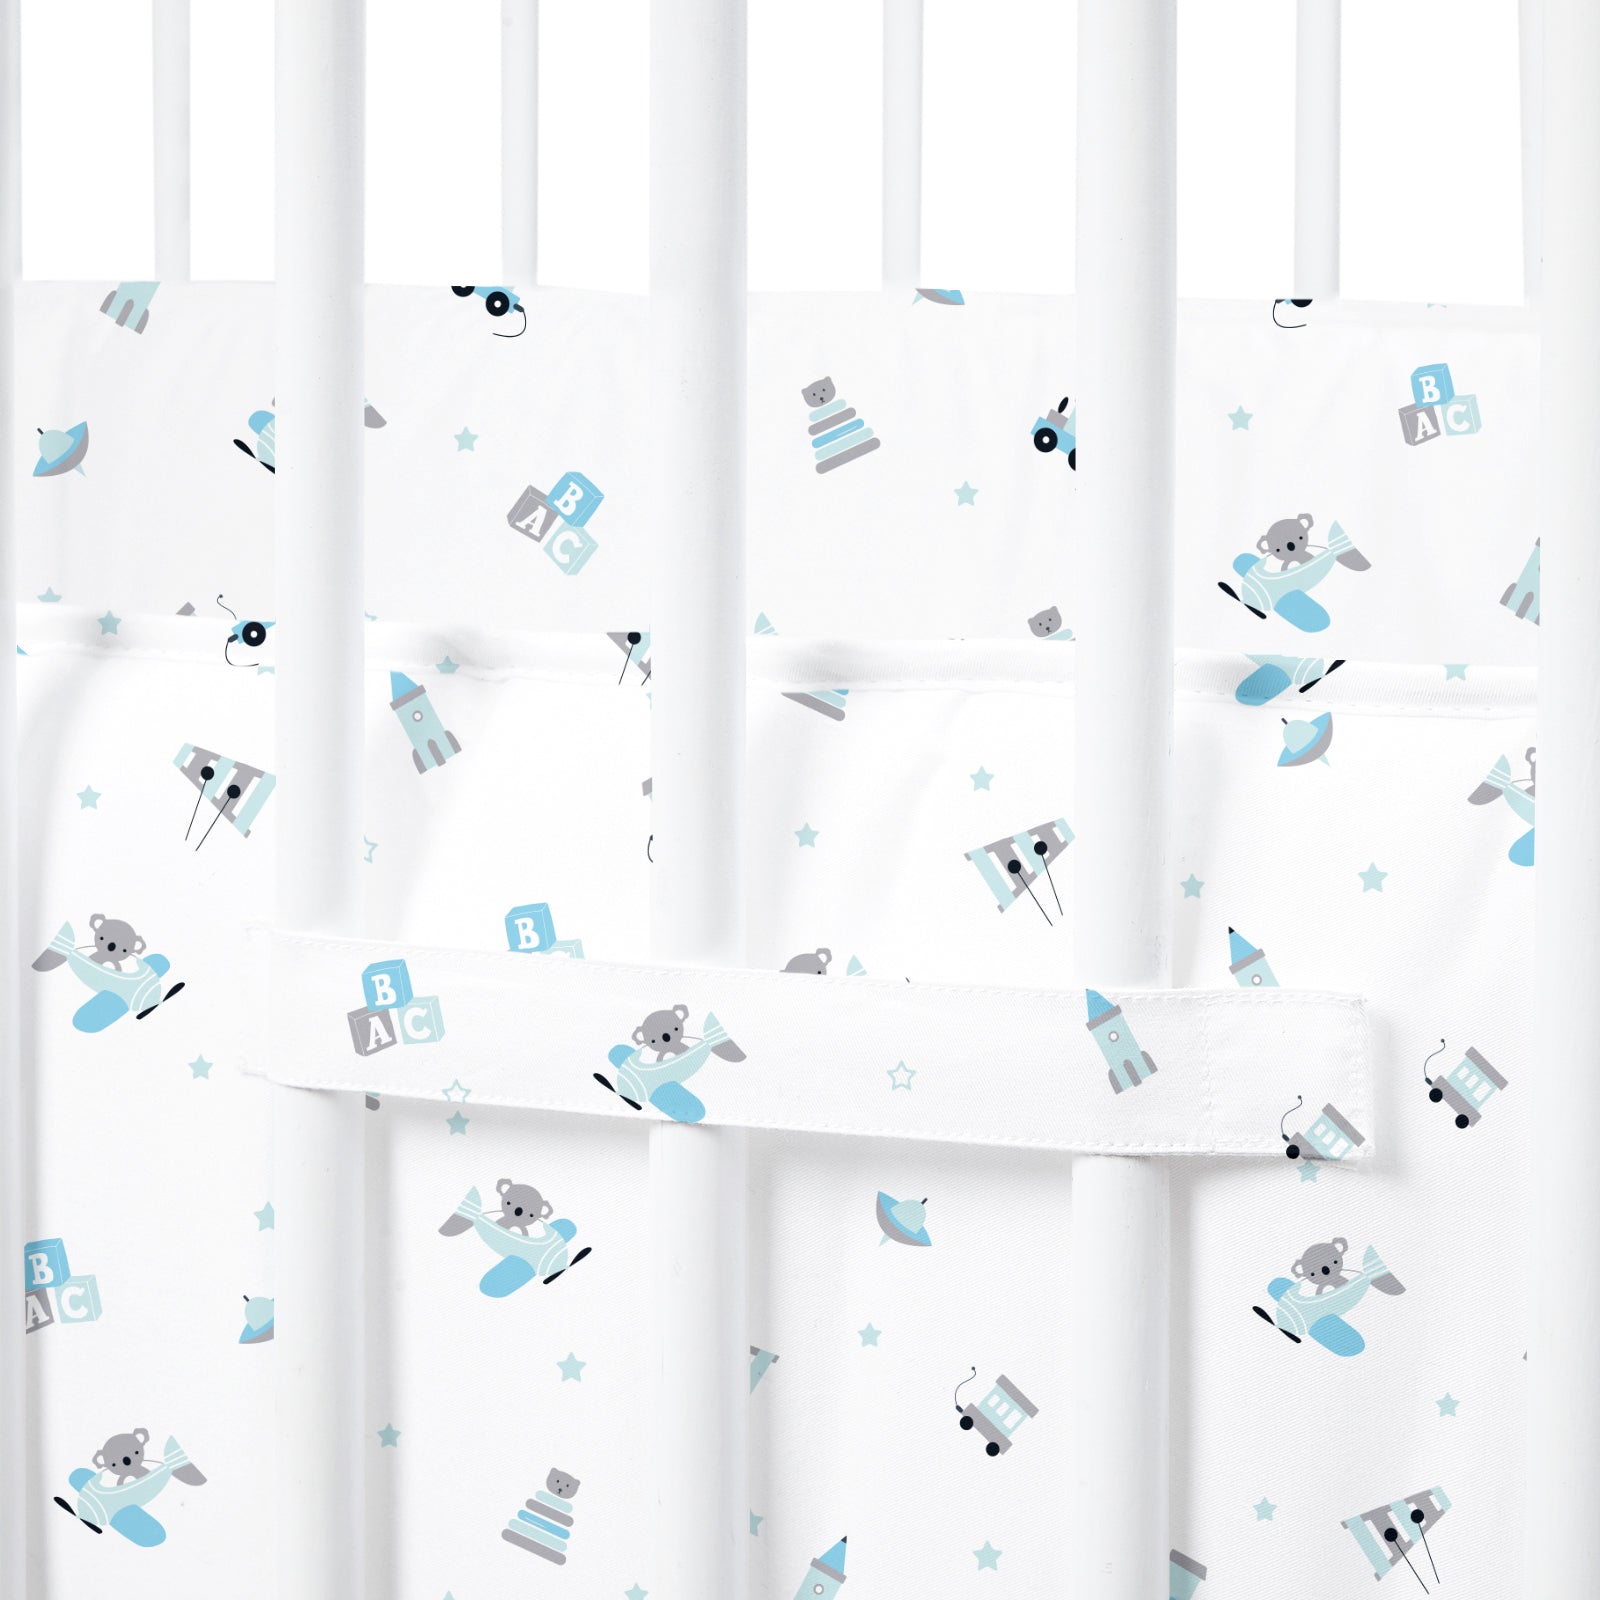 The White Cradle Baby Safe Cot Bumper Pad, Fits all Standard Cribs, Thick Padded Protective Liner for Child Nursery Bed, Soft Organic Cotton Fabric, Breathable, Non-Allergenic - Blue Koala